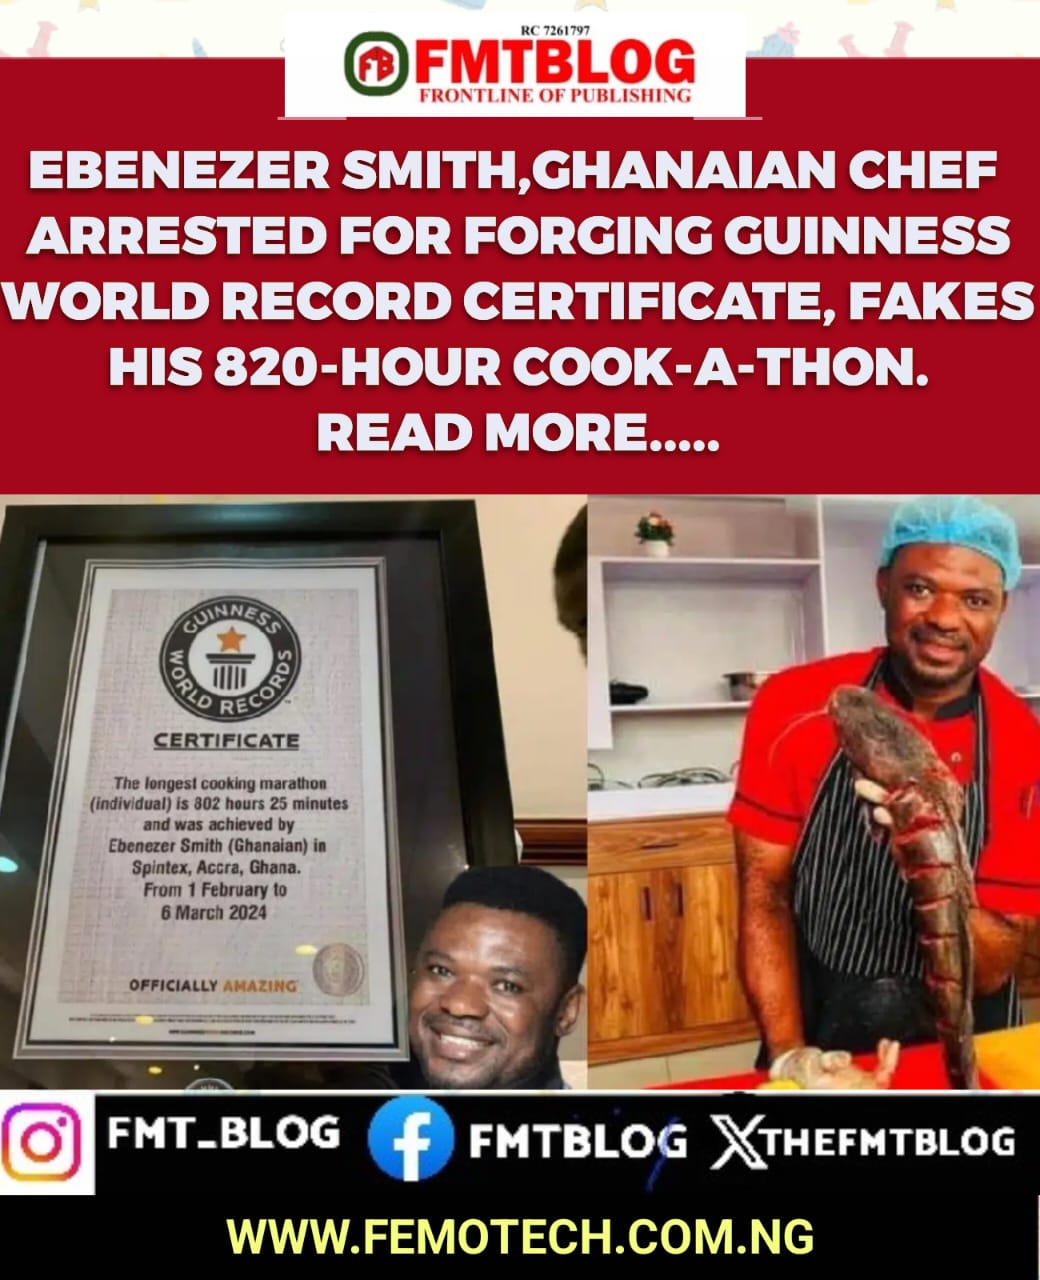 Ebenezer Smith, Ghanaian Chef Arrested For Forging Guinness World Record Certificate, Fakes His 820-Hour Cook-A-Thon.